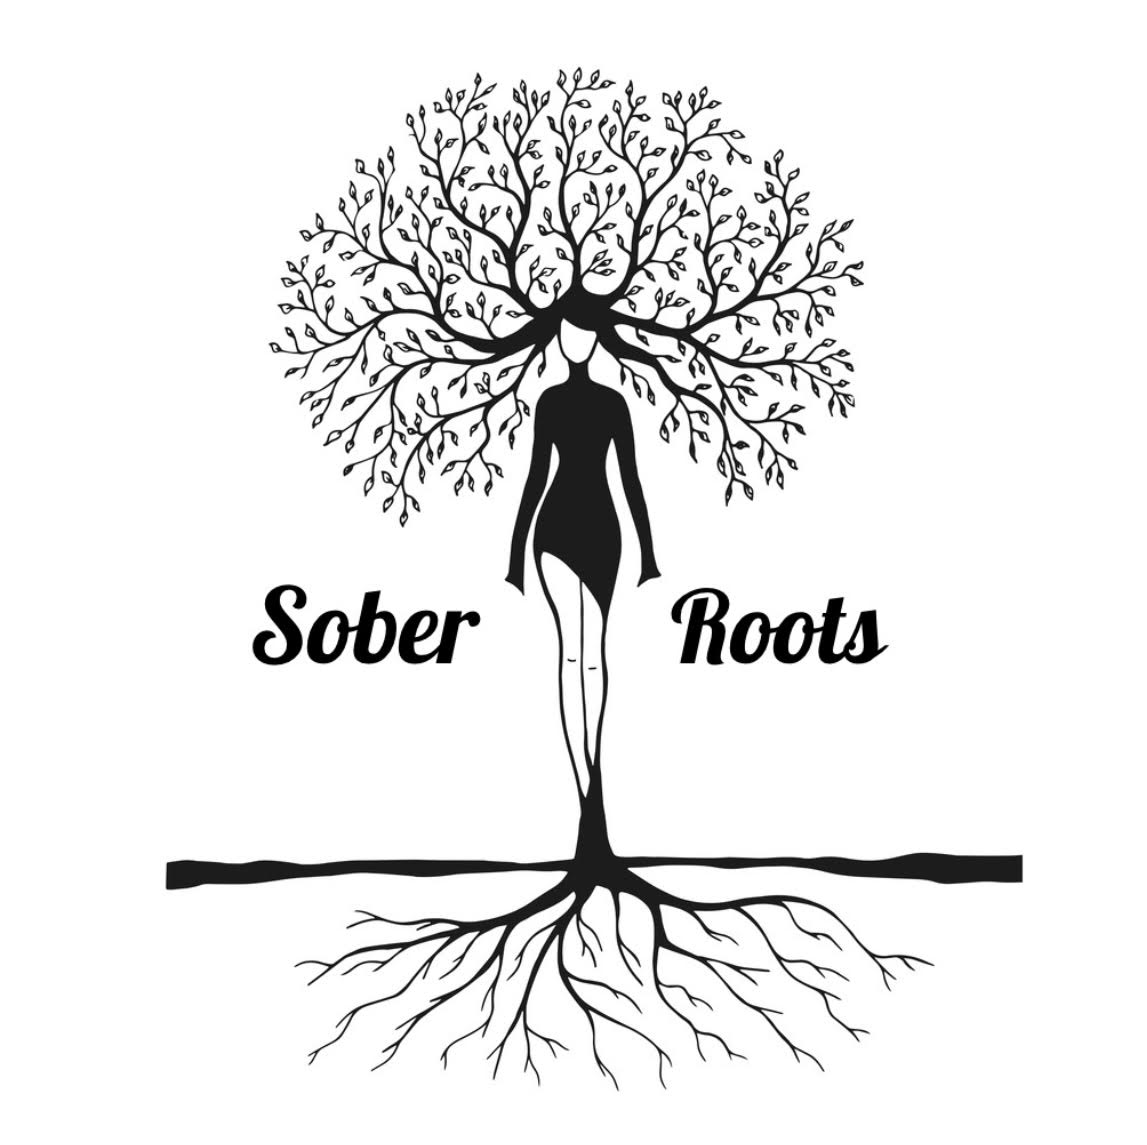 Black Dog Venture Partners Acquires 20% Stake in St. Petersburg based, Minority Owned Beauty Brand Sober Roots